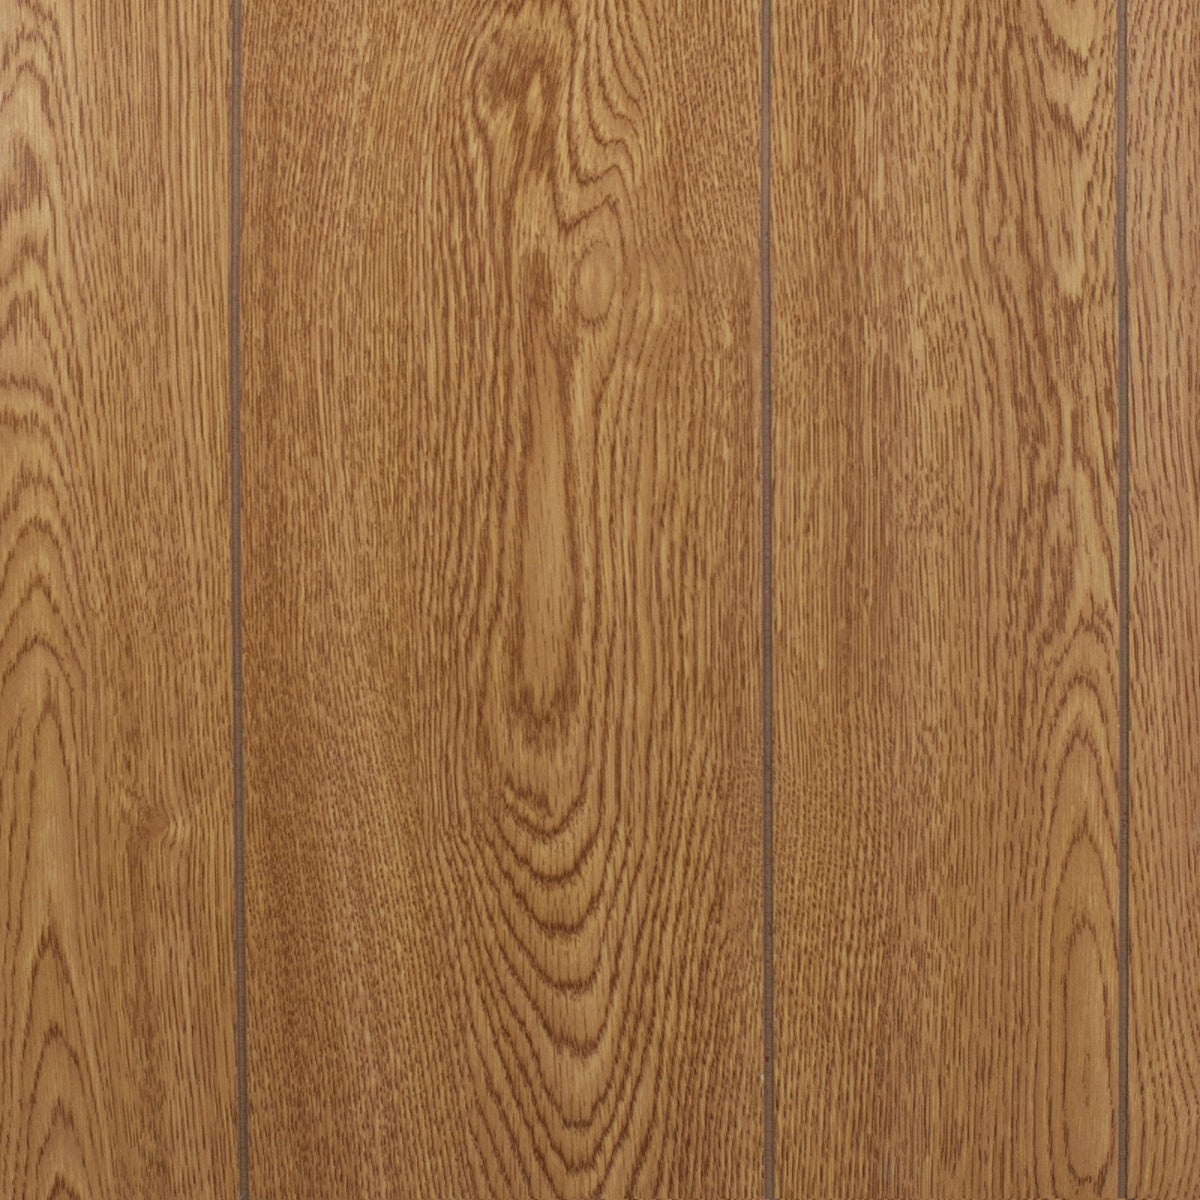 Global Product Sourcing 4 Ft. x 8 Ft. x 1/8 In. Honey Oak Random Groove Profile Wall Paneling